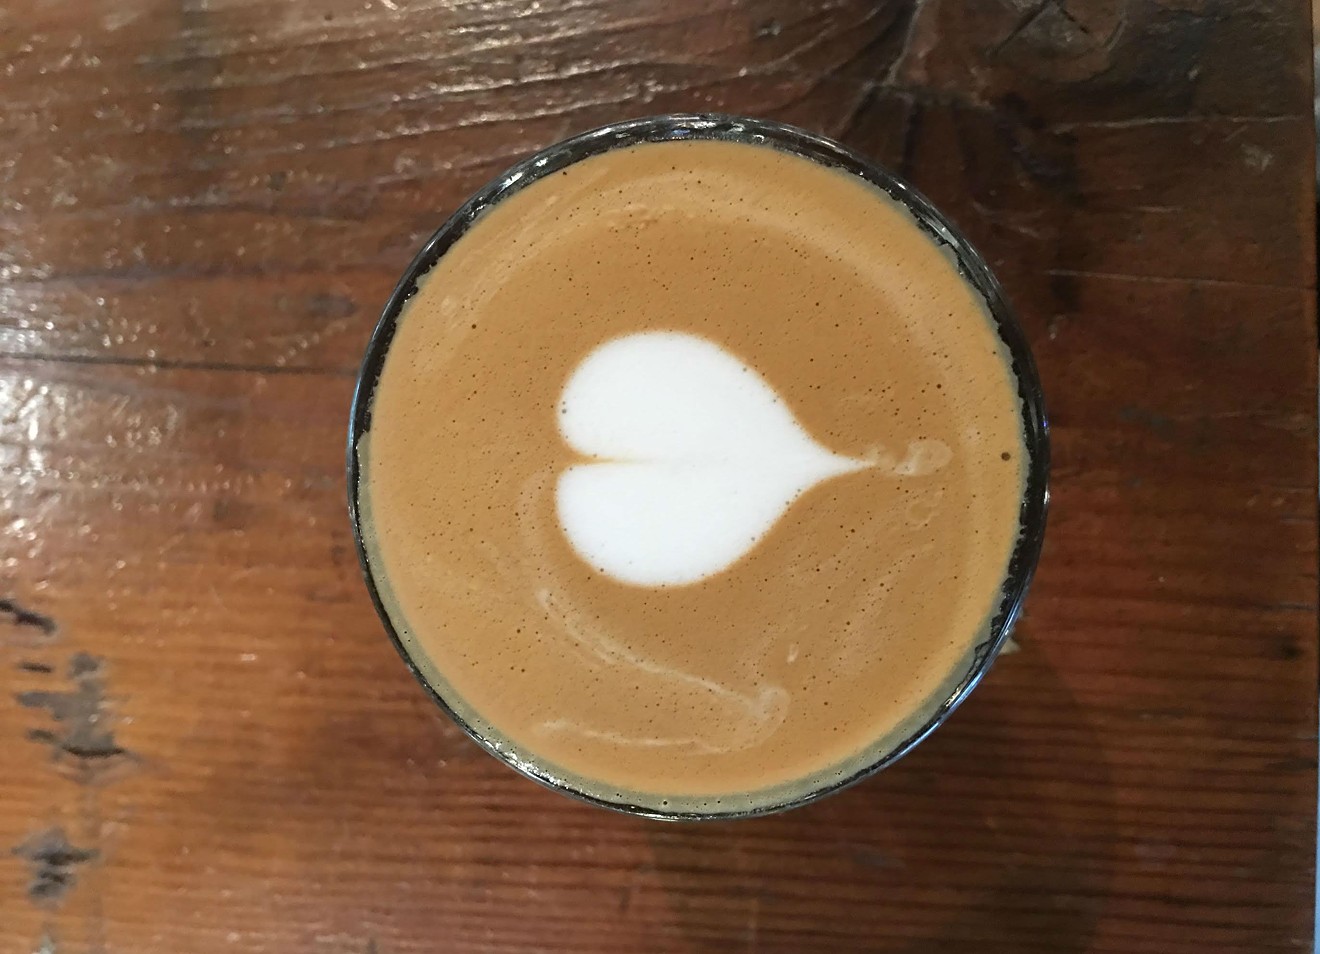 If dairy isn't your thing, cafes like Cultivar offer alternatives like almond milk.